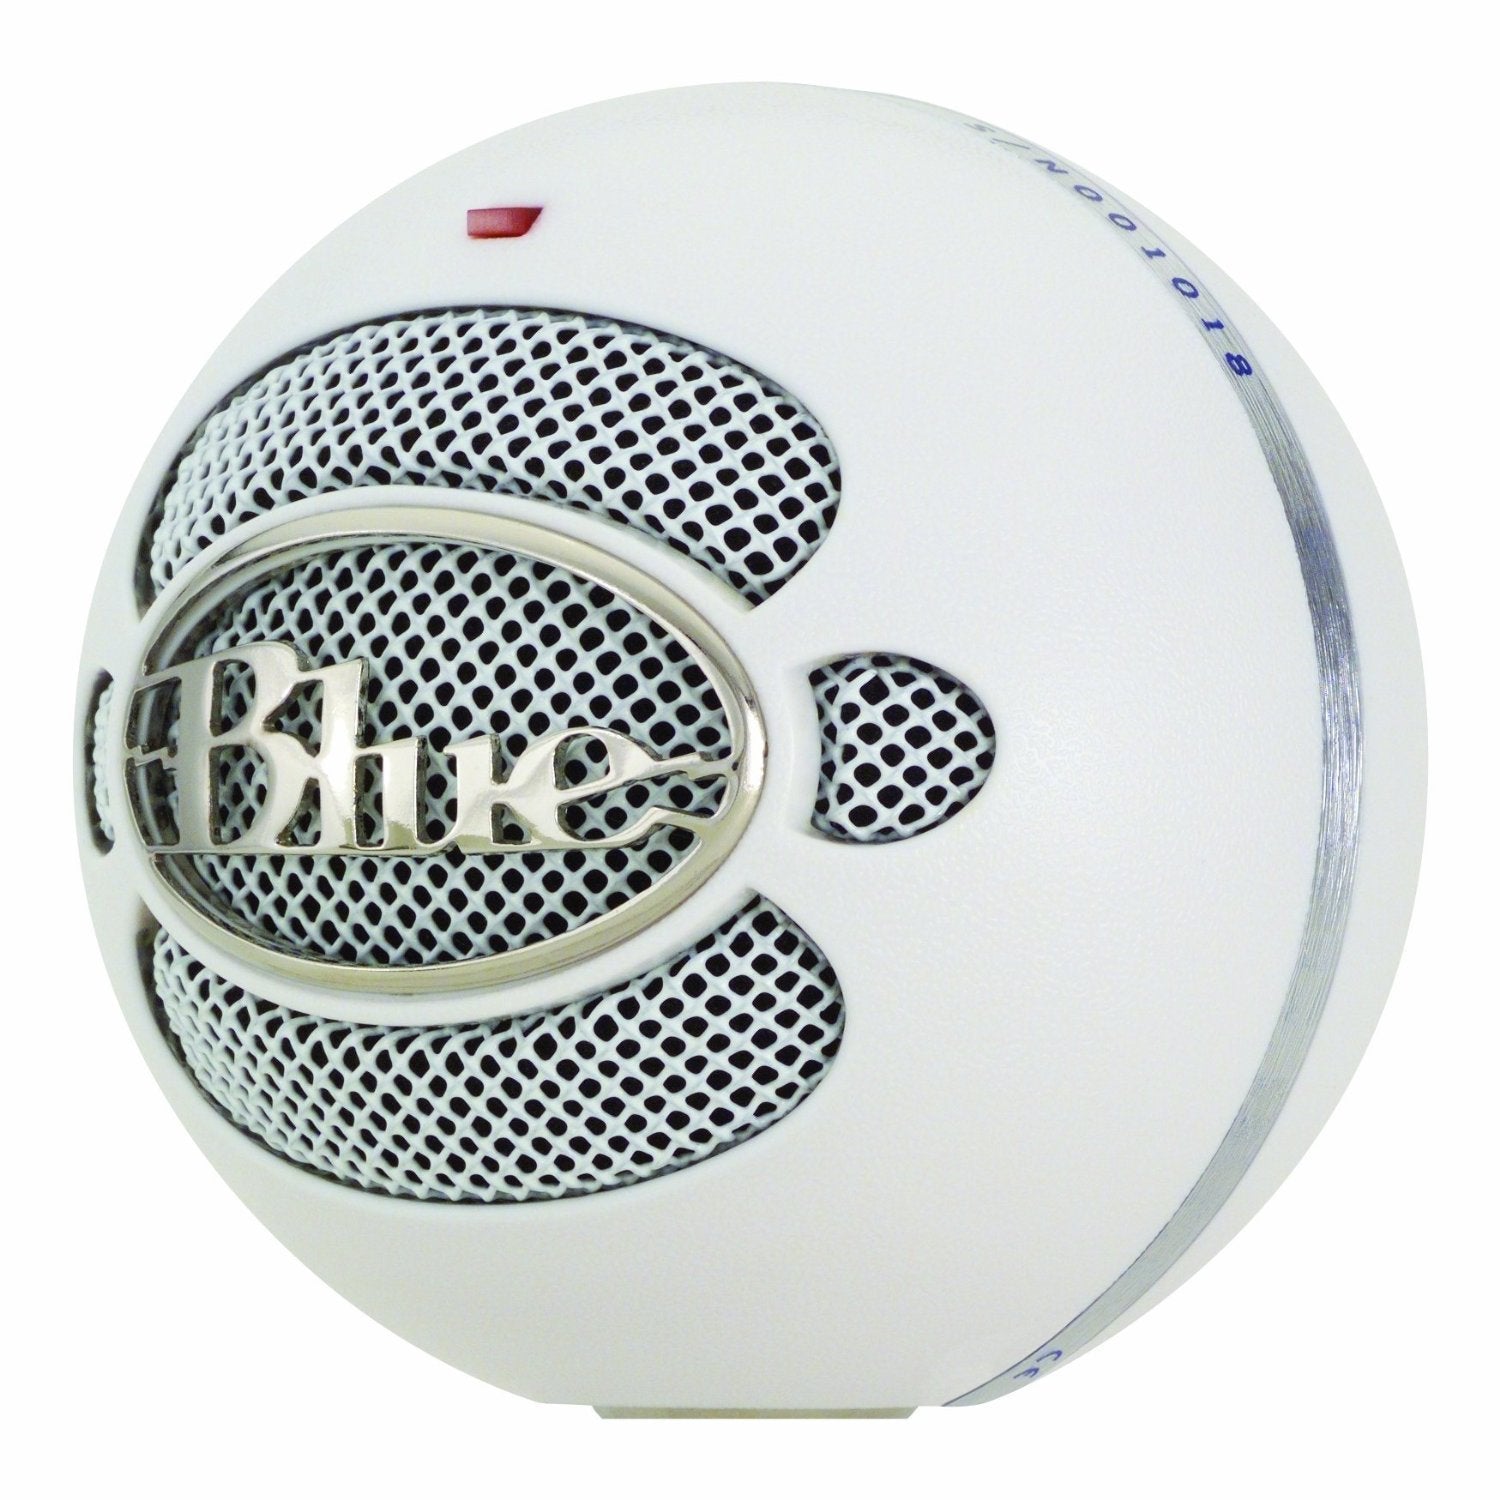 Blue Microphones Snowball USB Microphone (Textured White) - PC Games